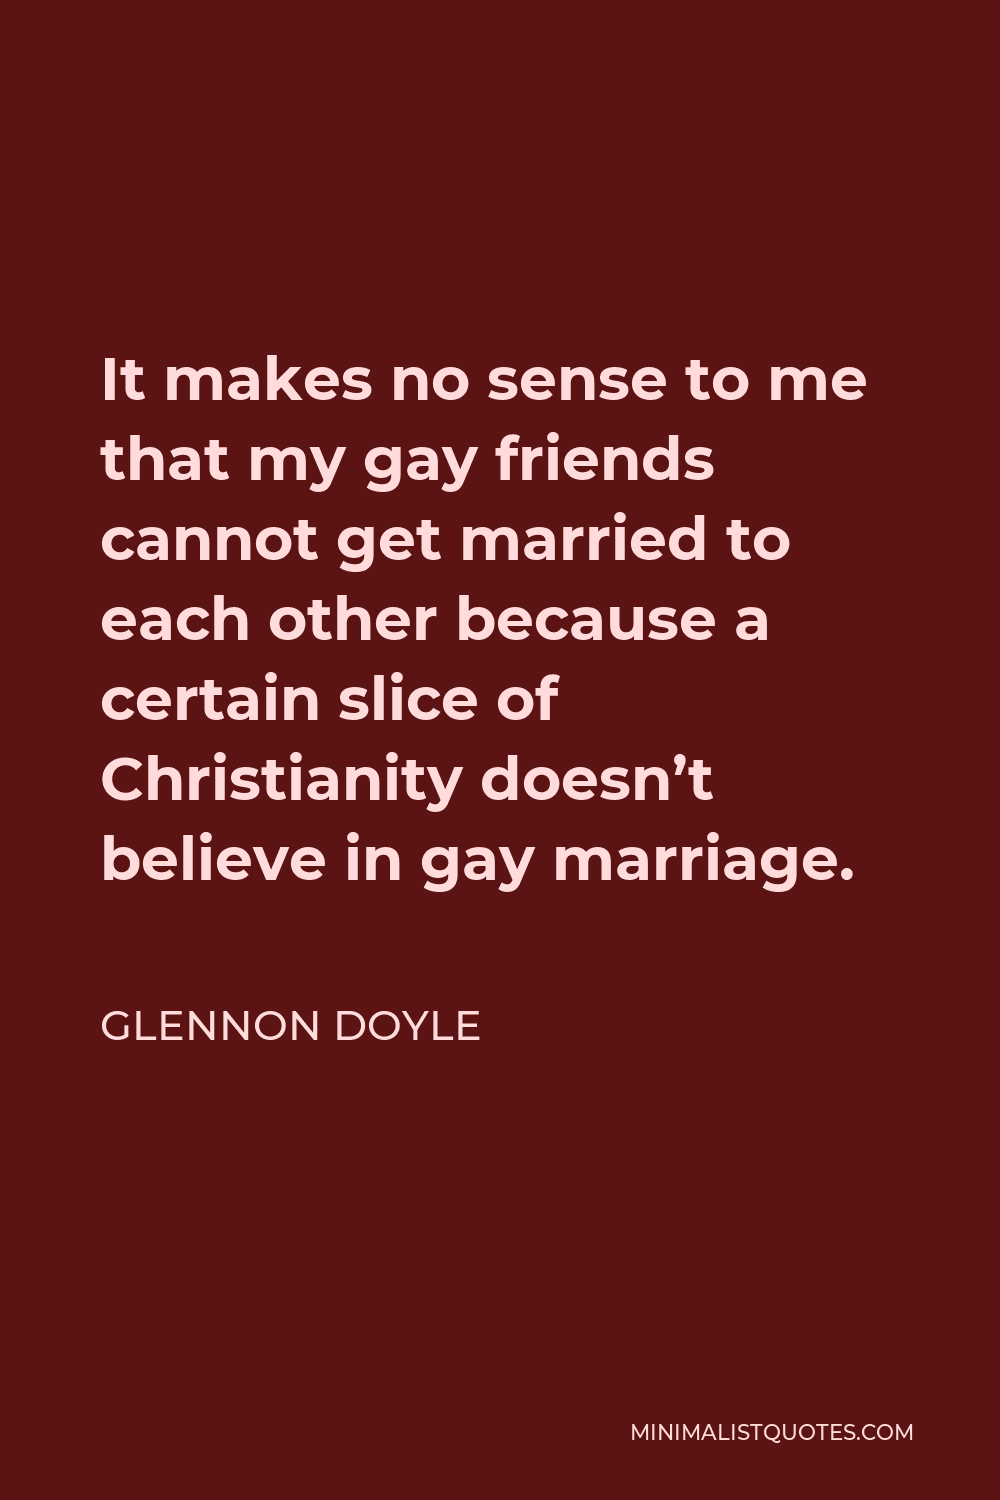 Glennon Doyle Quote - It makes no sense to me that my gay friends cannot get married to each other because a certain slice of Christianity doesn’t believe in gay marriage.